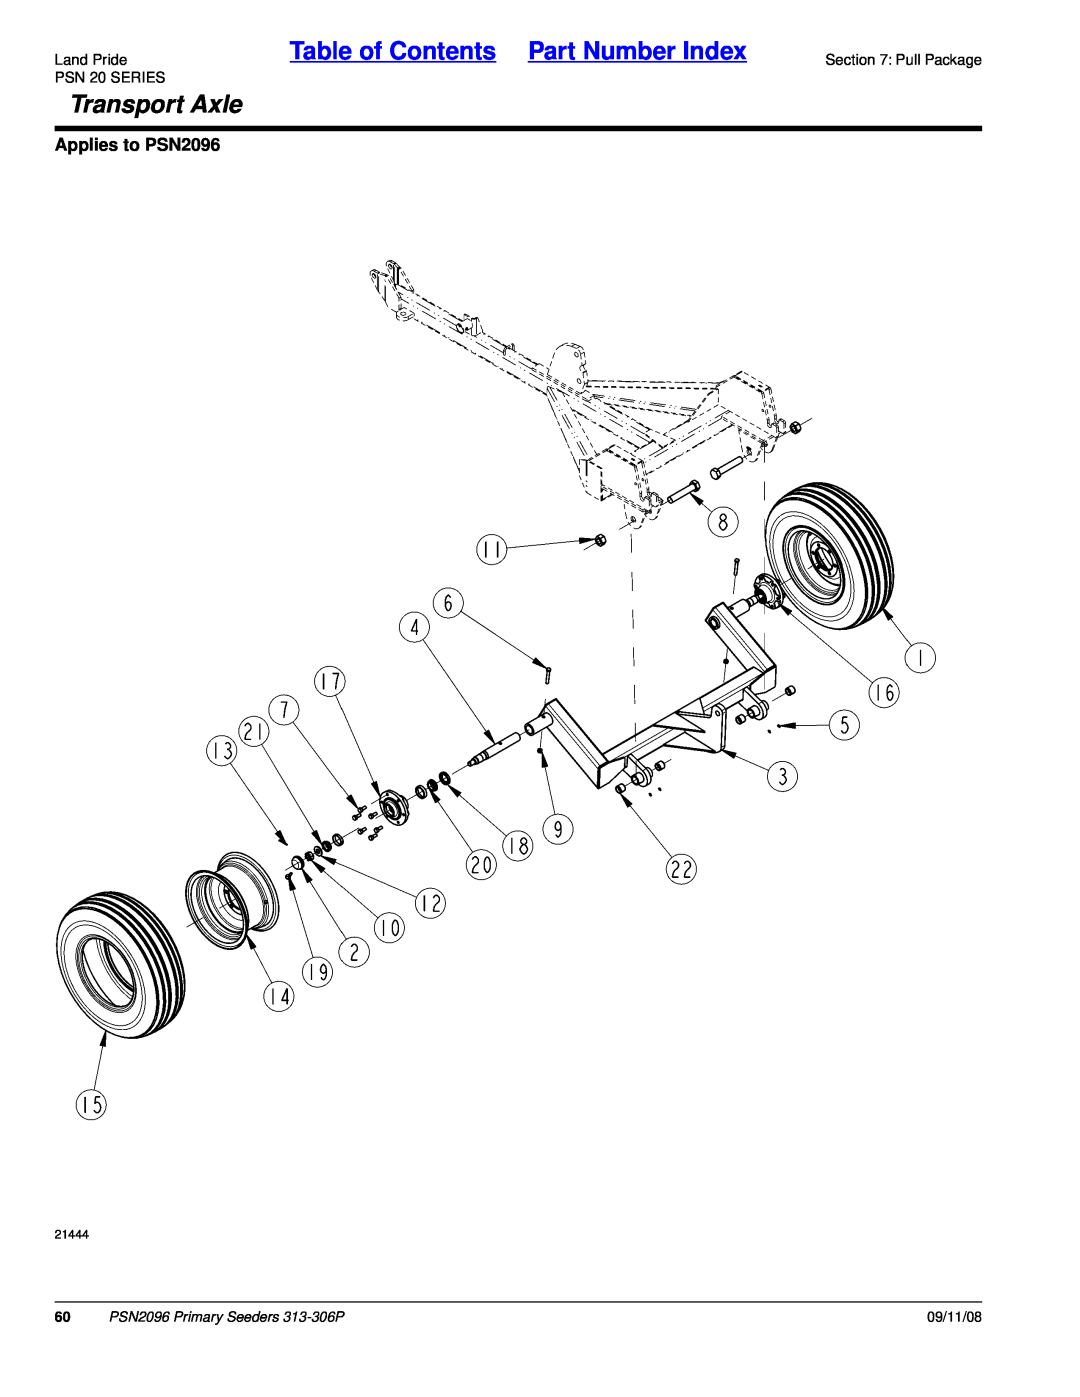 Land Pride Transport Axle, Table of Contents Part Number Index, Applies to PSN2096, PSN2096 Primary Seeders 313-306P 